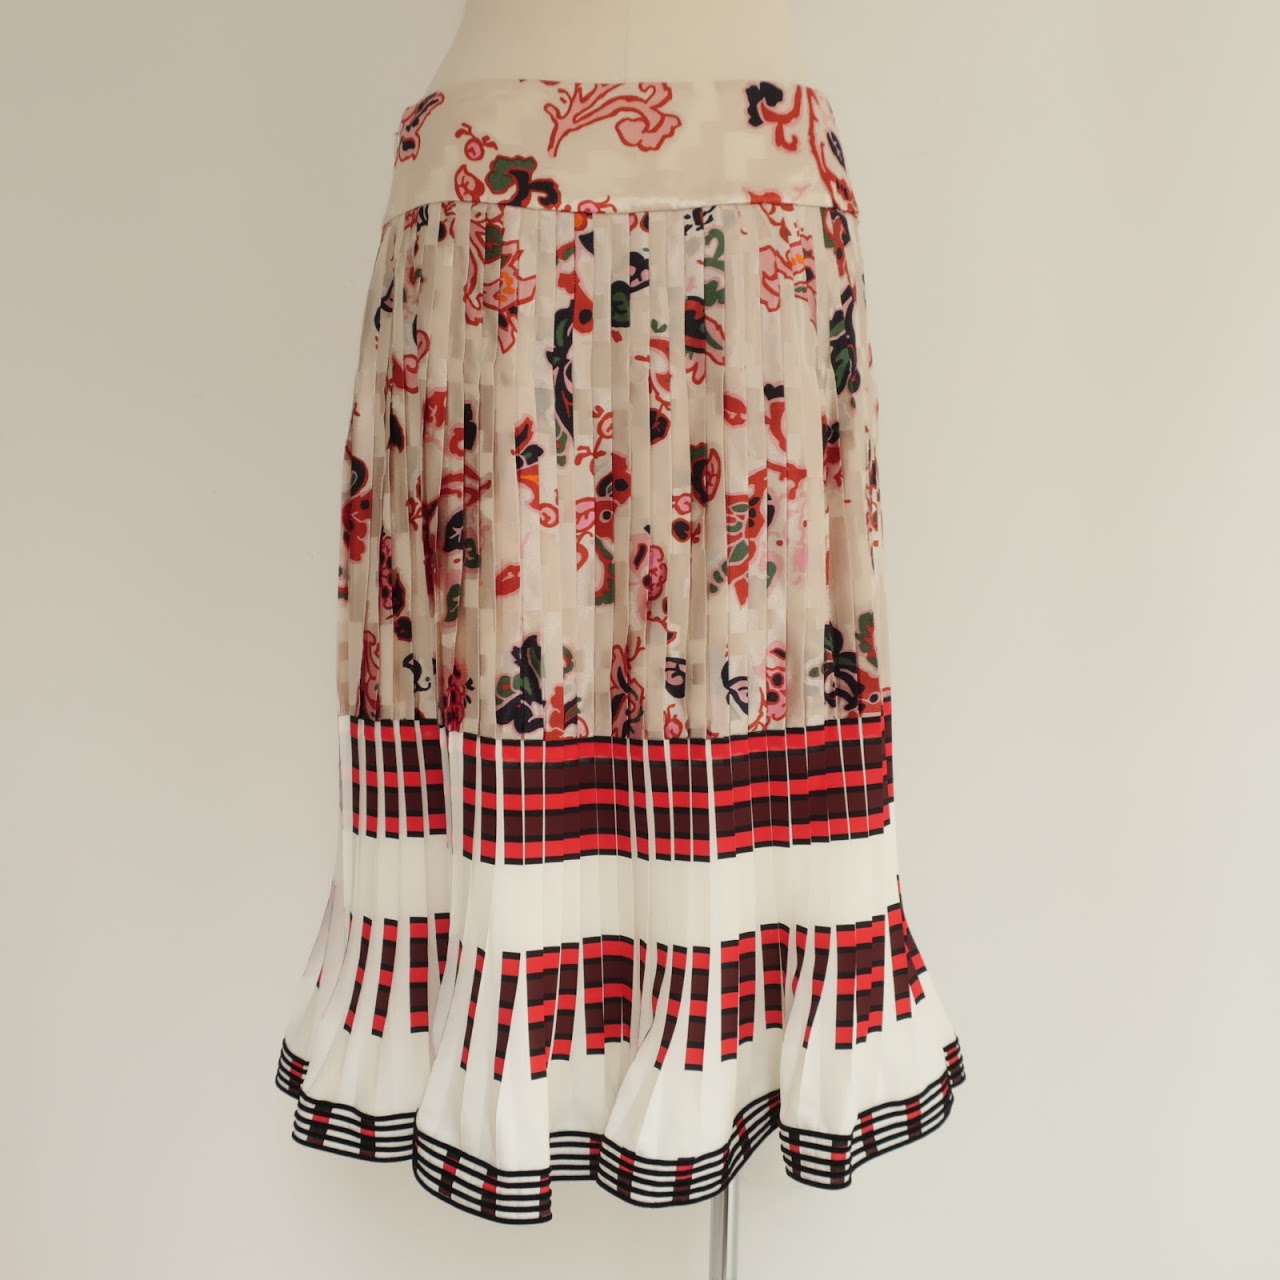 Tory Burch NEW Printed Pleated Skirt